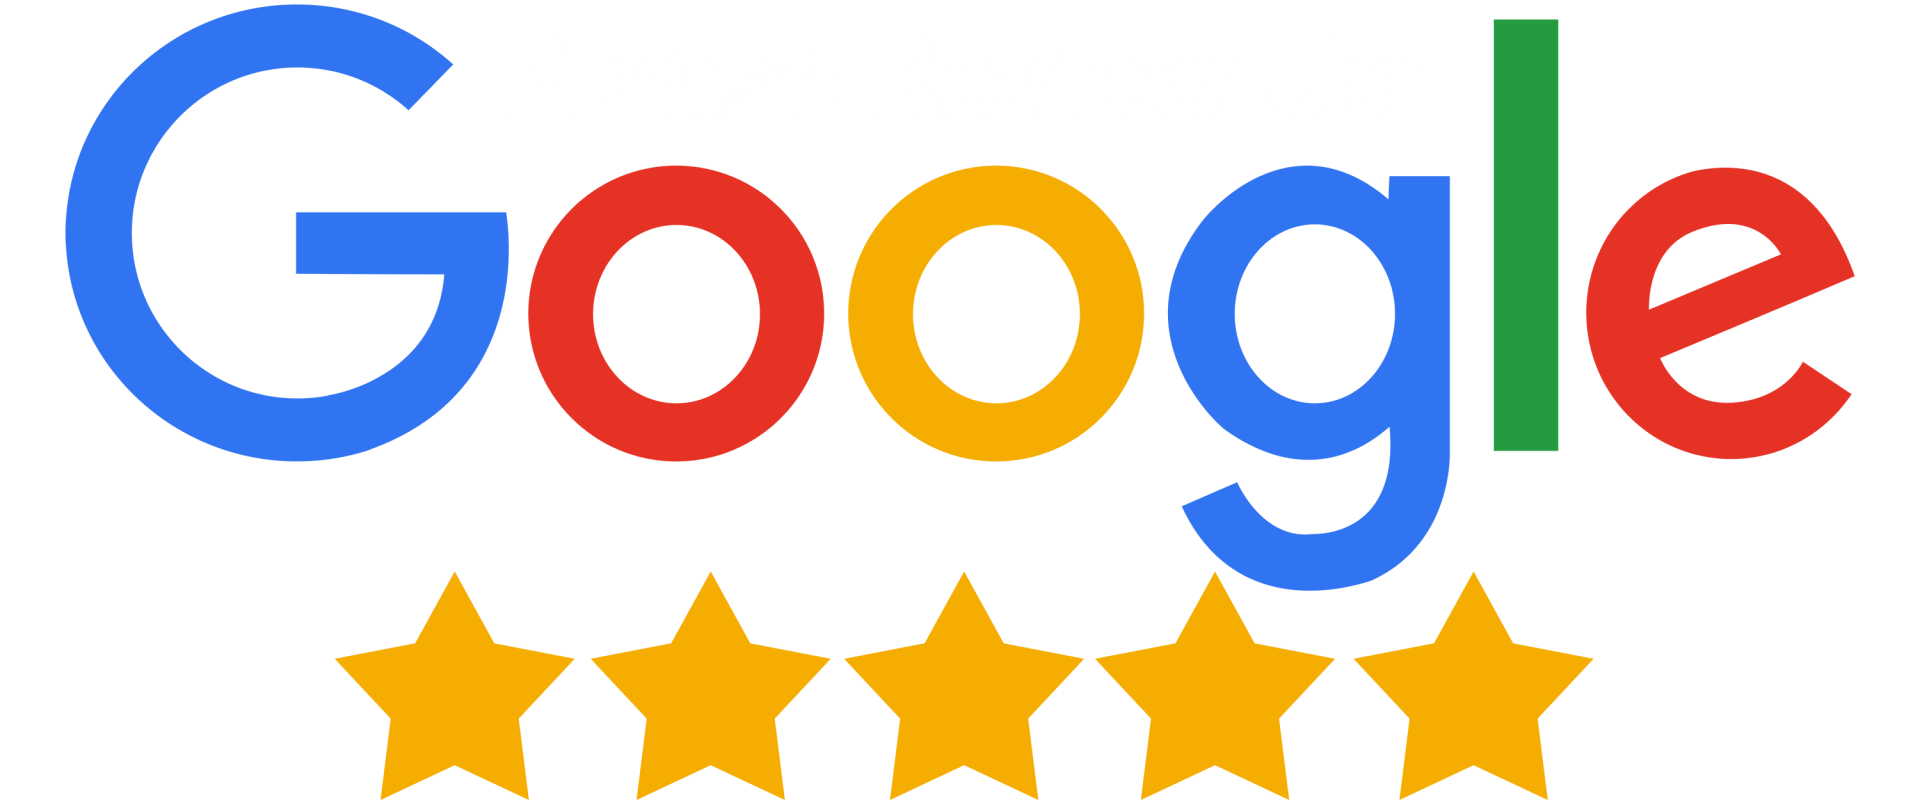 Google Review — Terre Haute, IN — Wabash Valley Tree Service